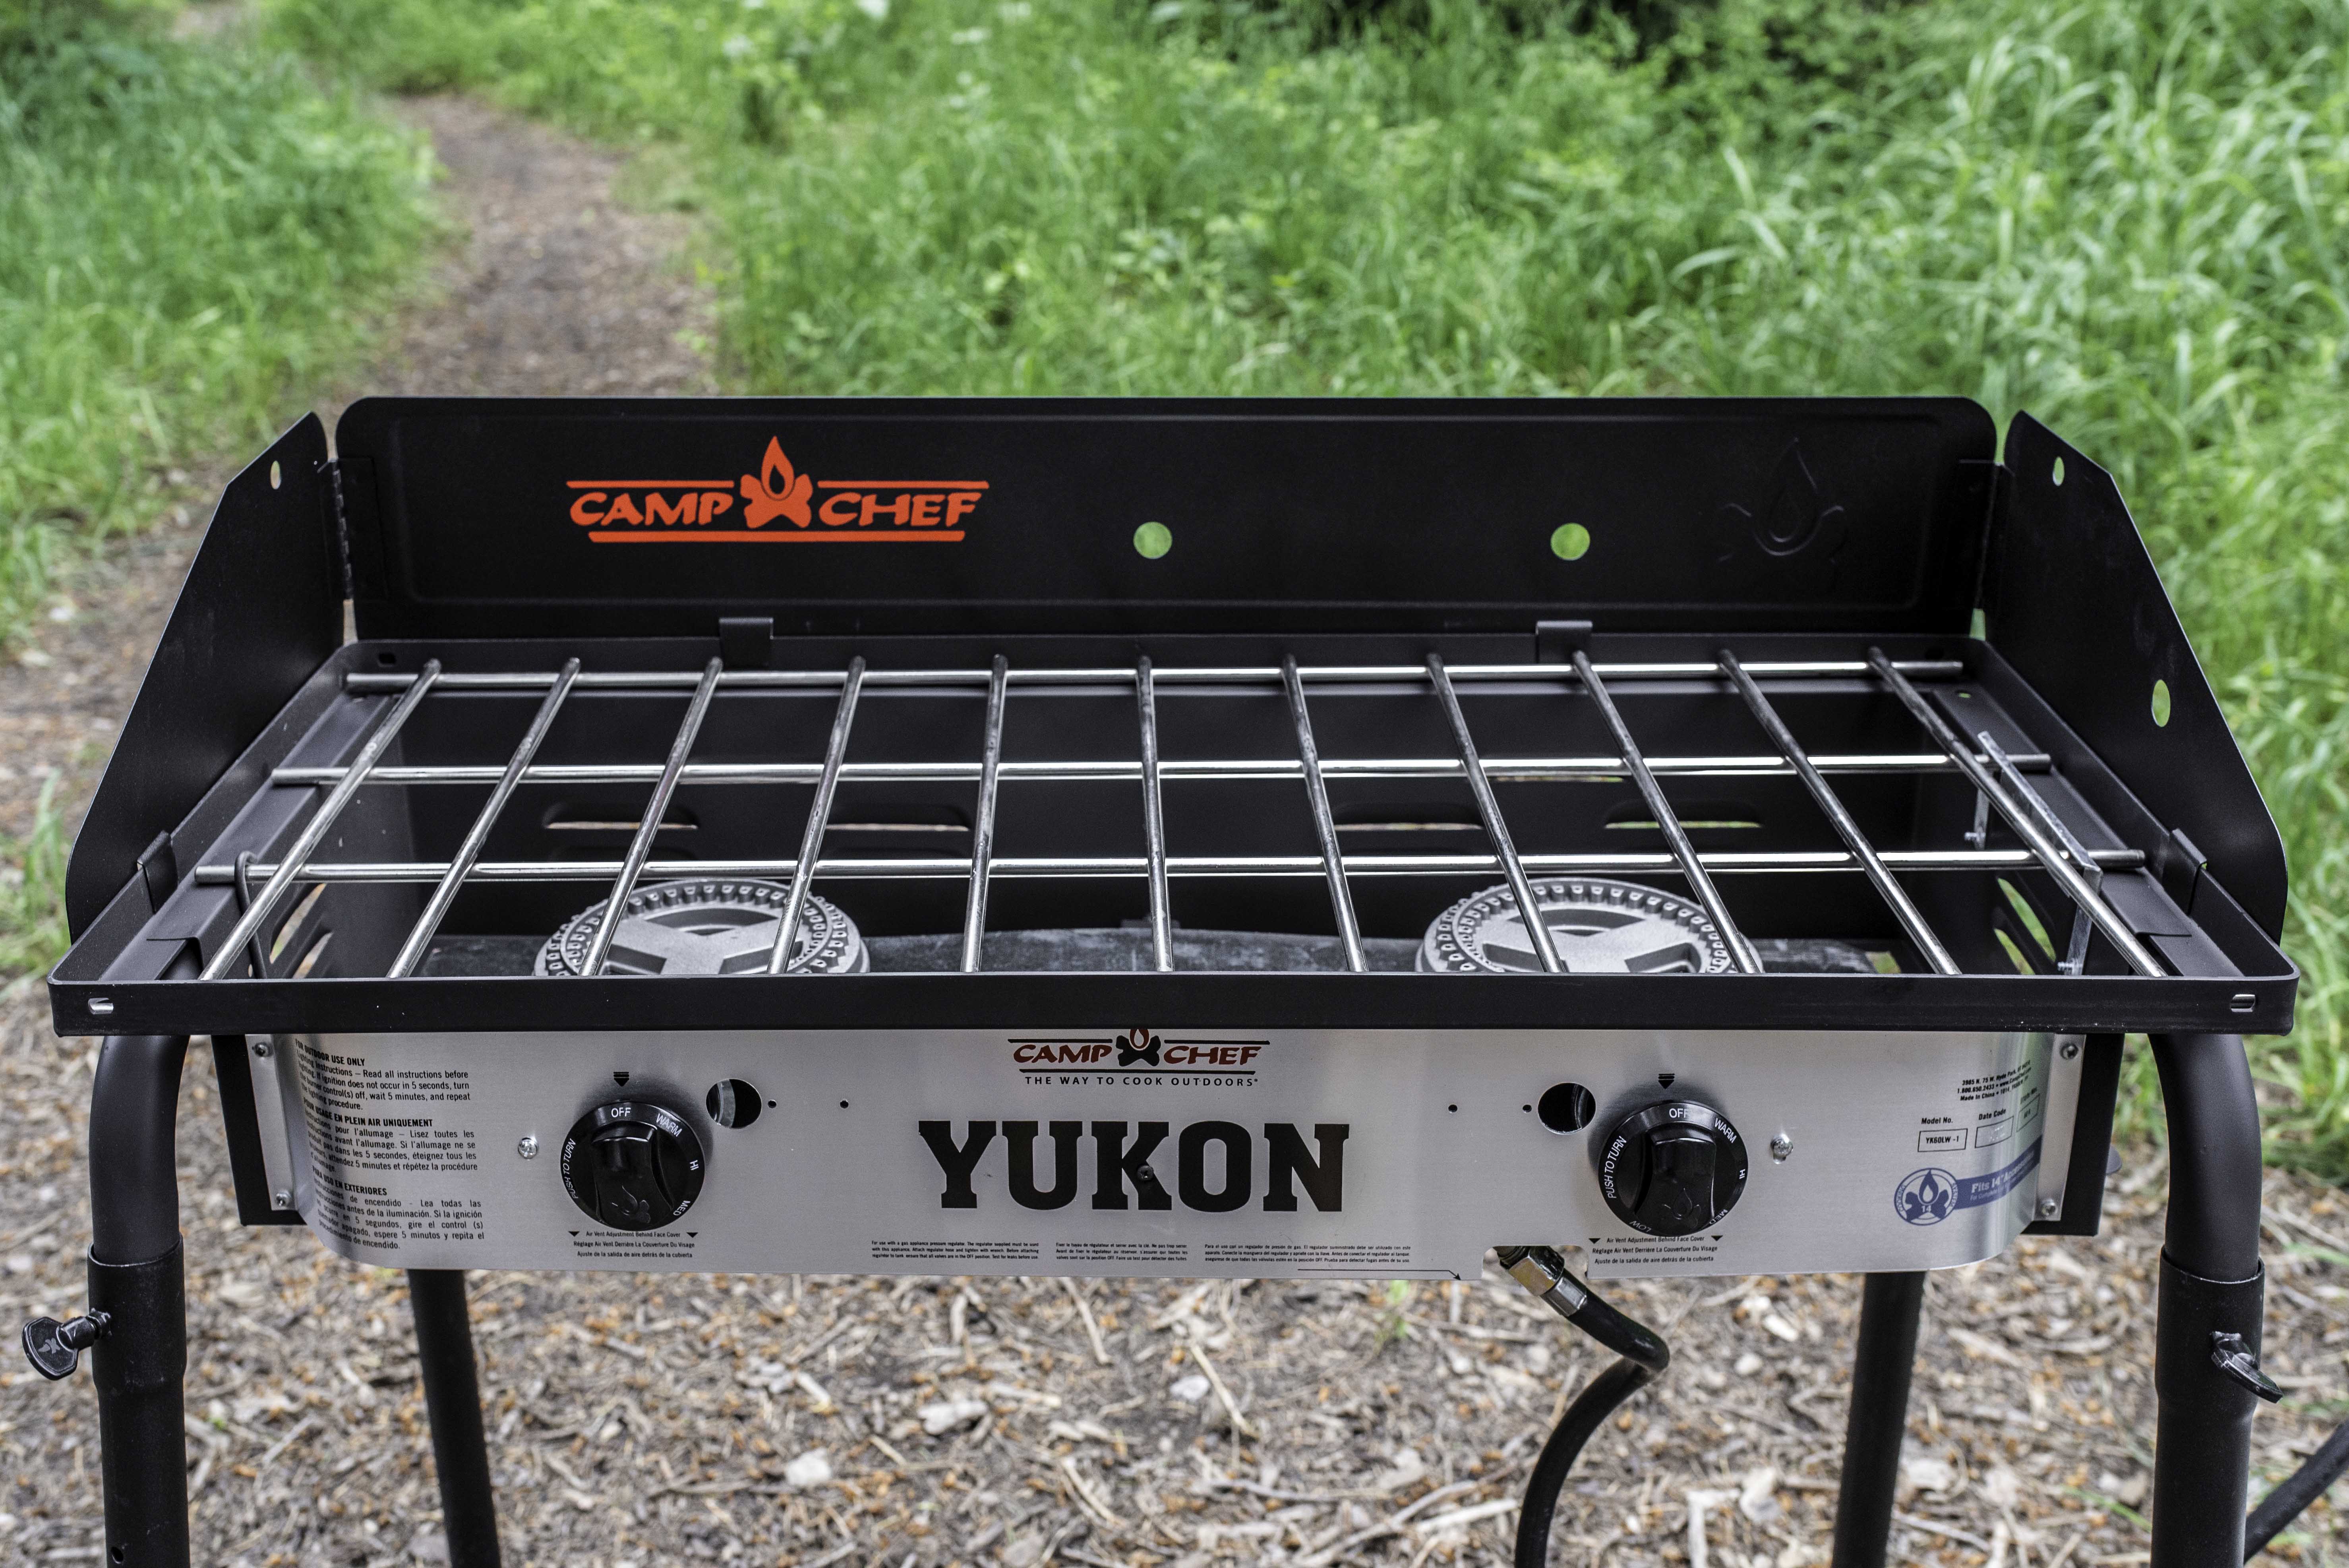 Camp Chef Yukon Double Dual Burner Camping Travel Outdoor Stove - YK60LW - image 5 of 18